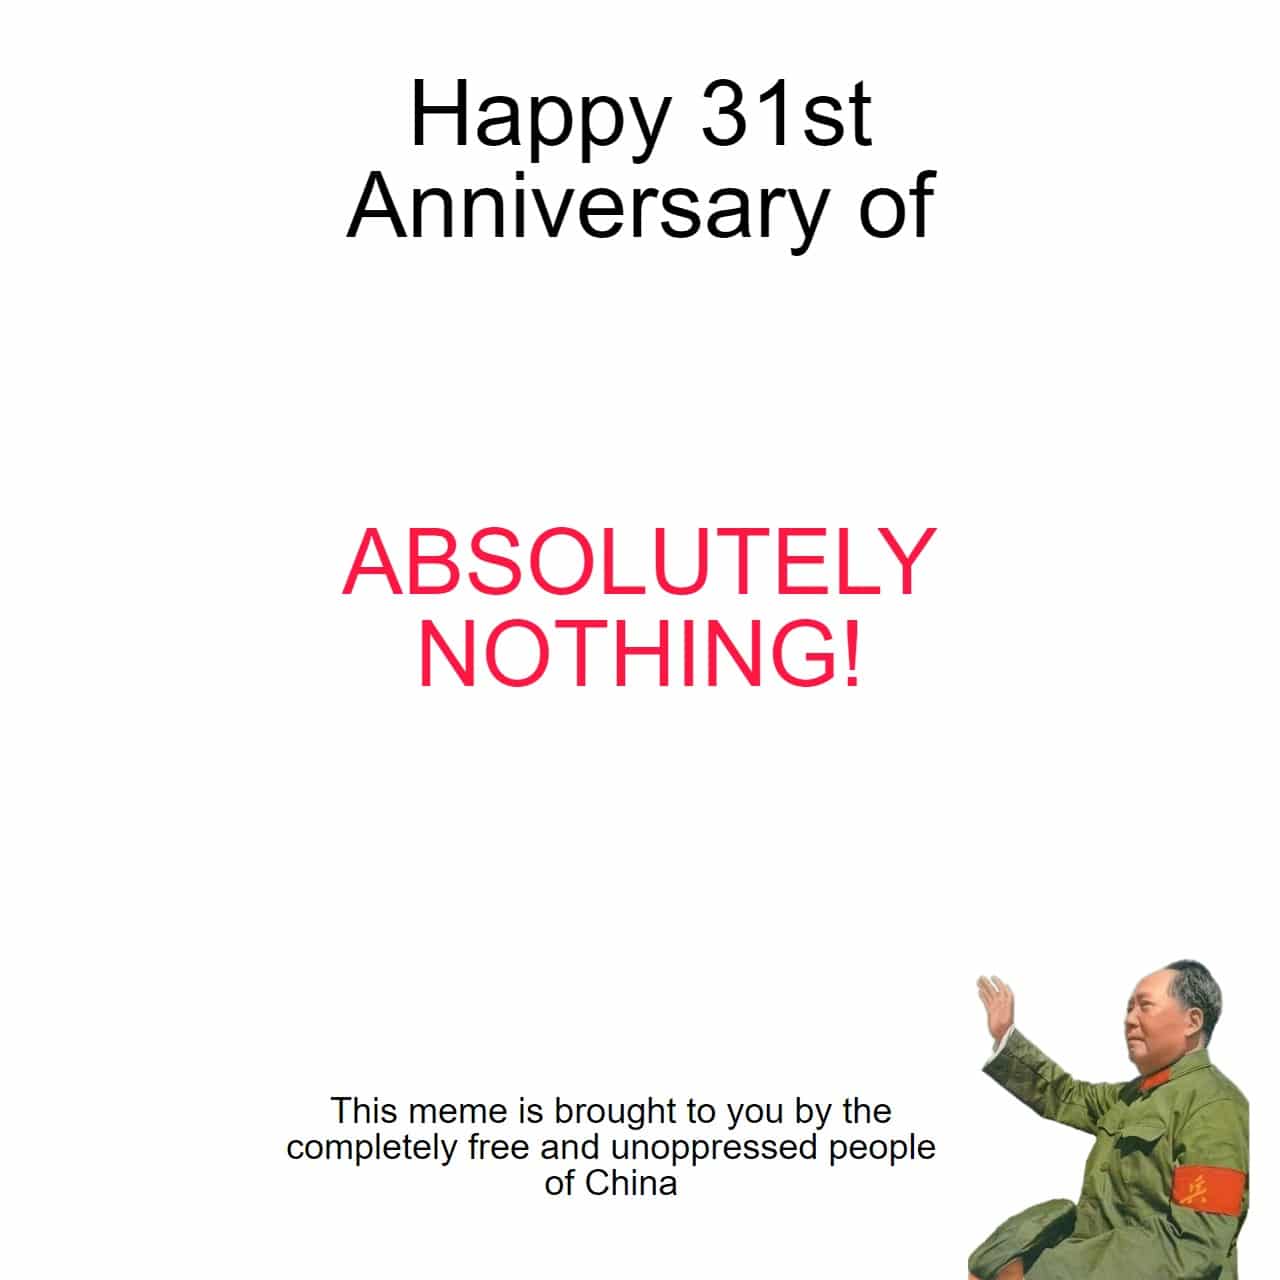 History, China, REDACTED, Mao, CCP, Deng Xiaoping History Memes History, China, REDACTED, Mao, CCP, Deng Xiaoping text: Happy 31st Anniversary of ABSOLUTELY NOTHING! This meme is brought to you by the completely free and unoppressed people of China 